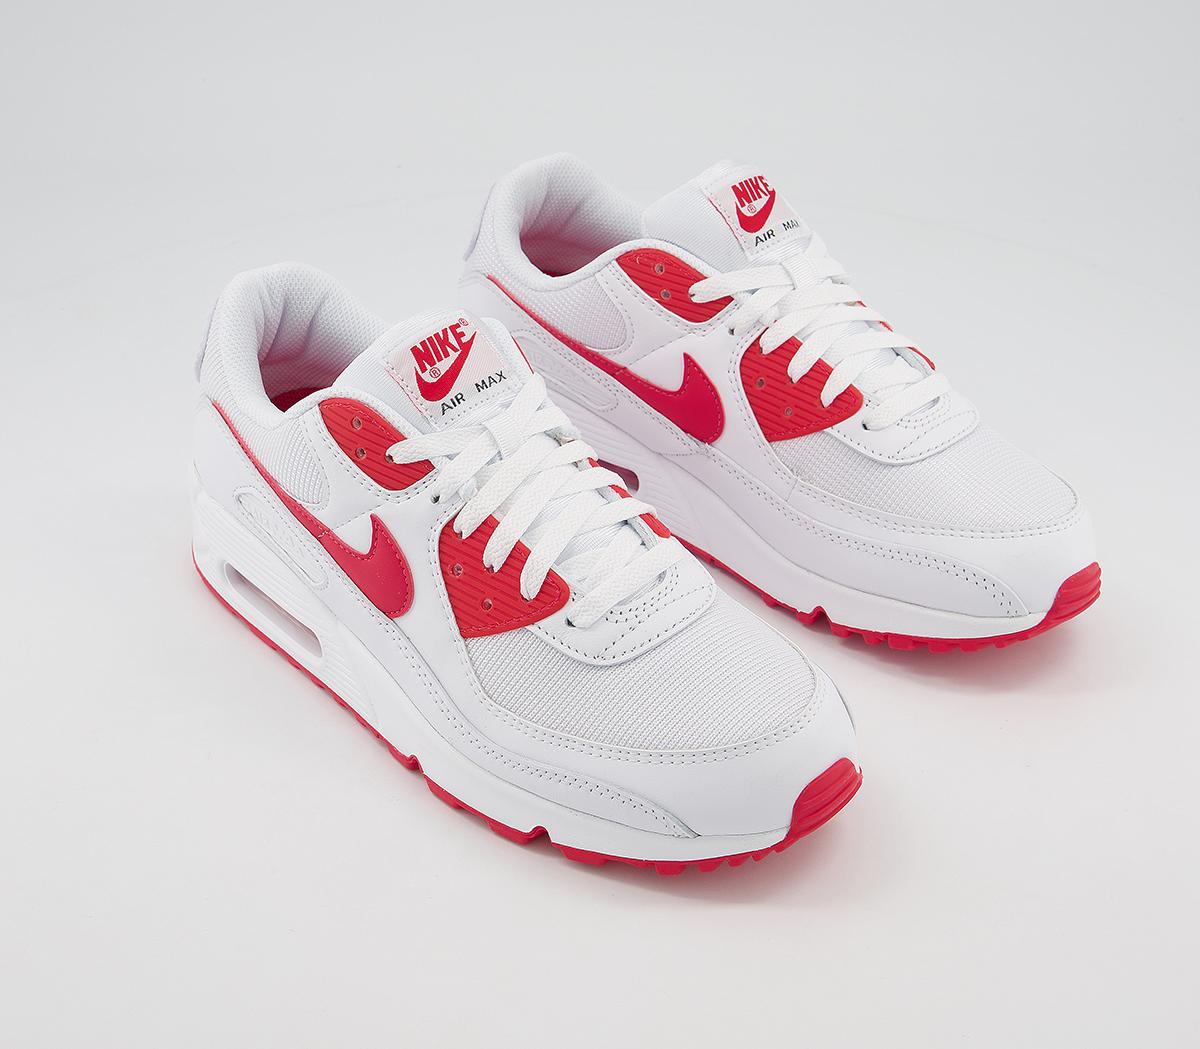 Nike Air Max 90 Trainers White Hyper Red Black - His trainers